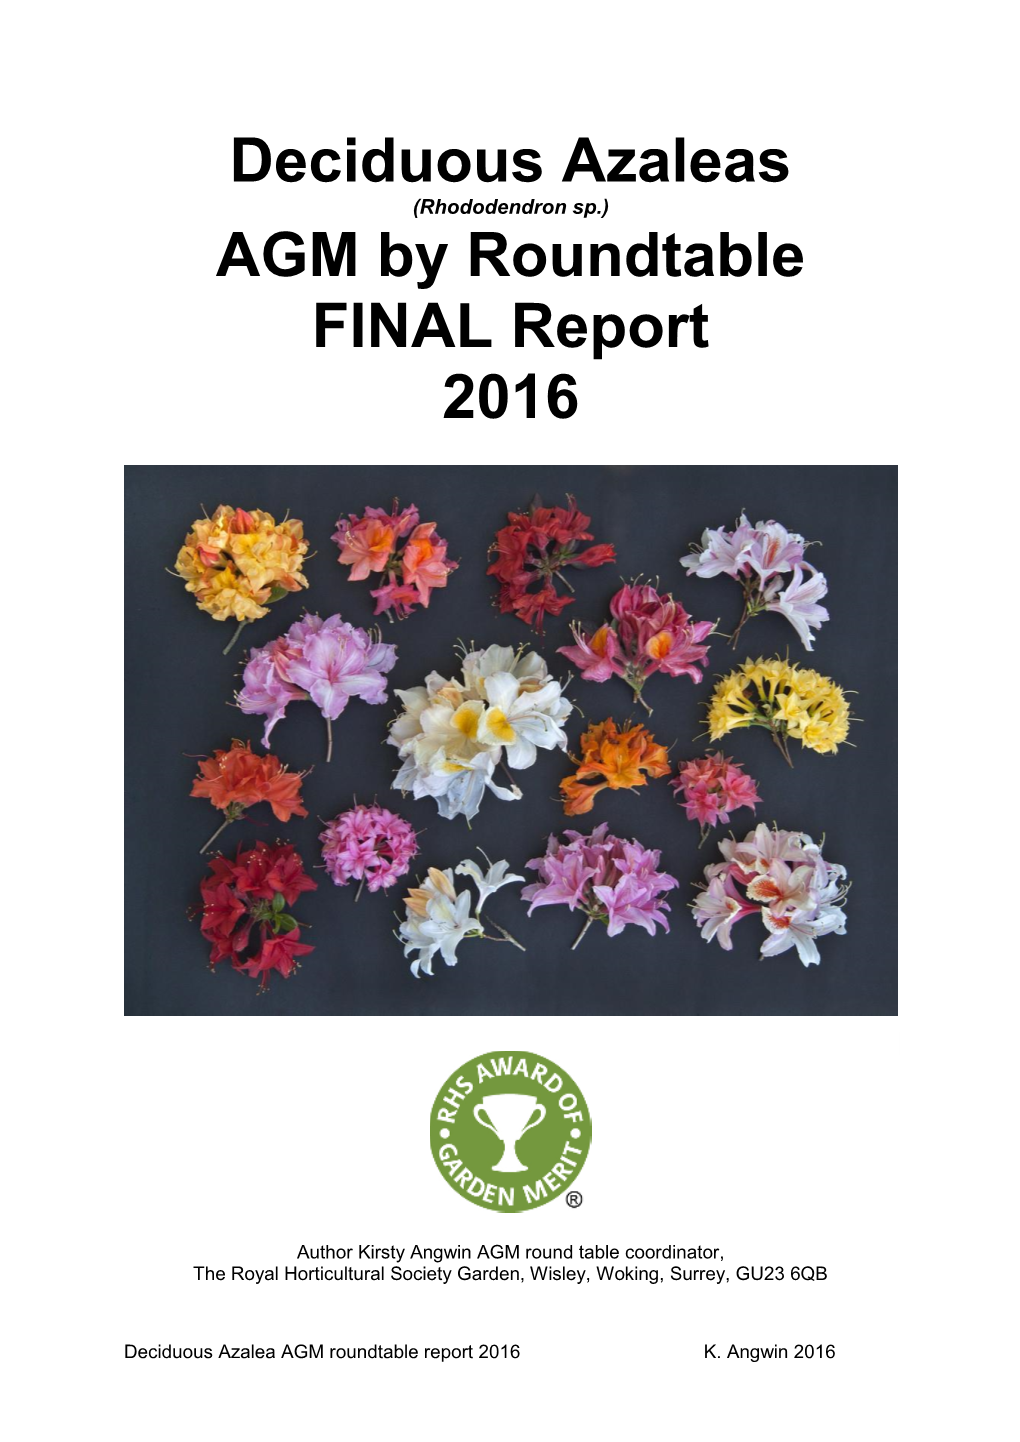 Deciduous Azaleas (Rhododendron Sp.) AGM by Roundtable FINAL Report 2016